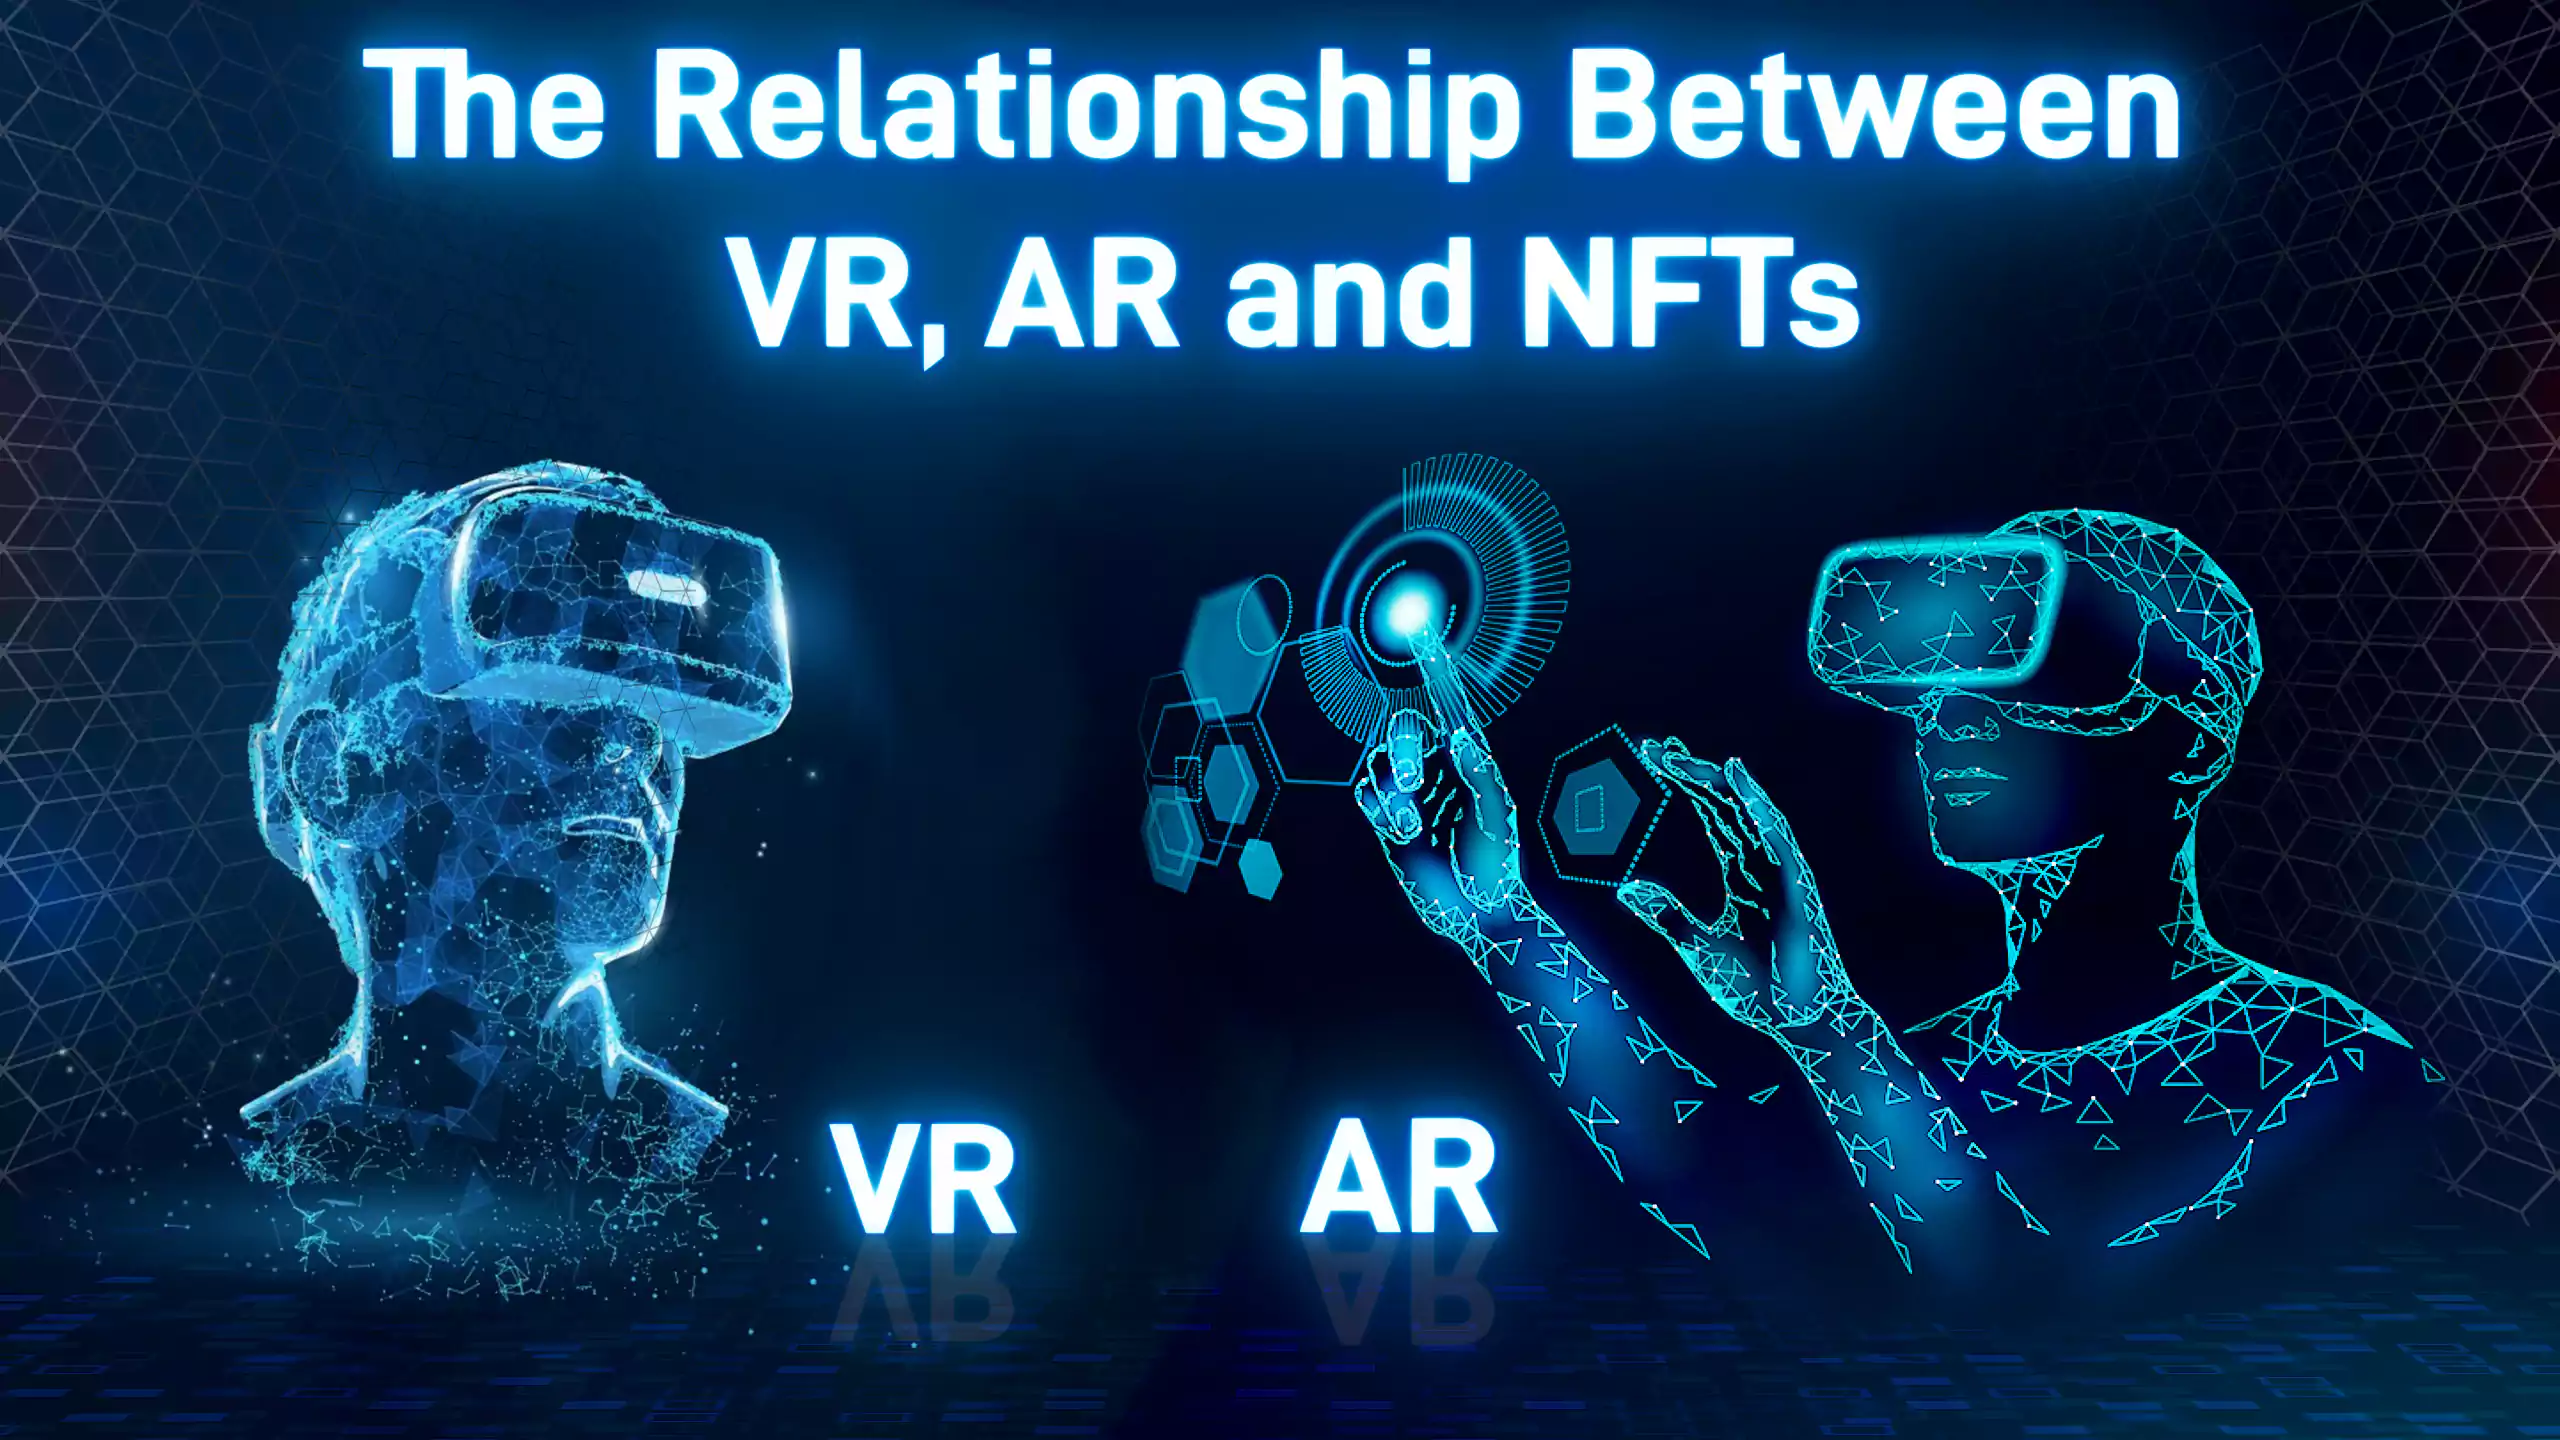 The Relationship Between VR, AR and NFTs